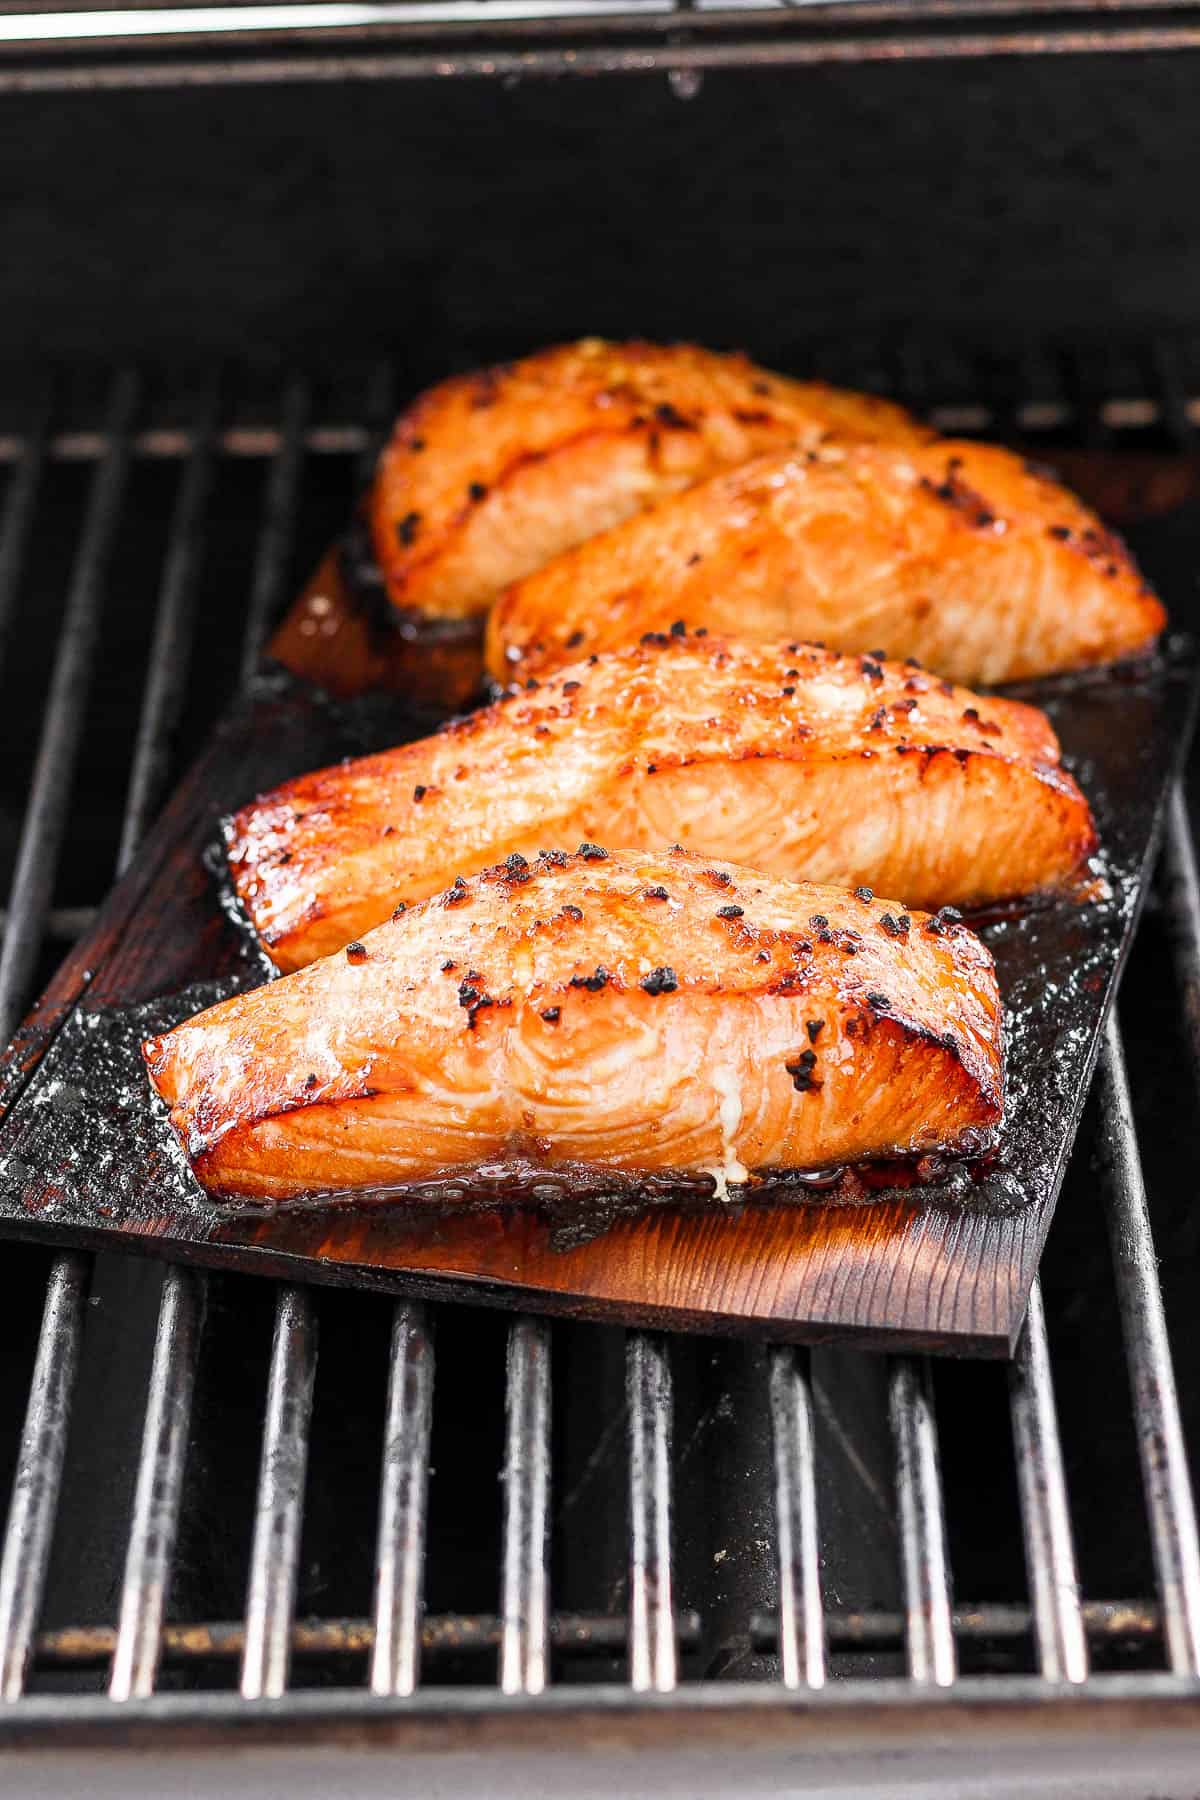 Salmon cooking on the grill.